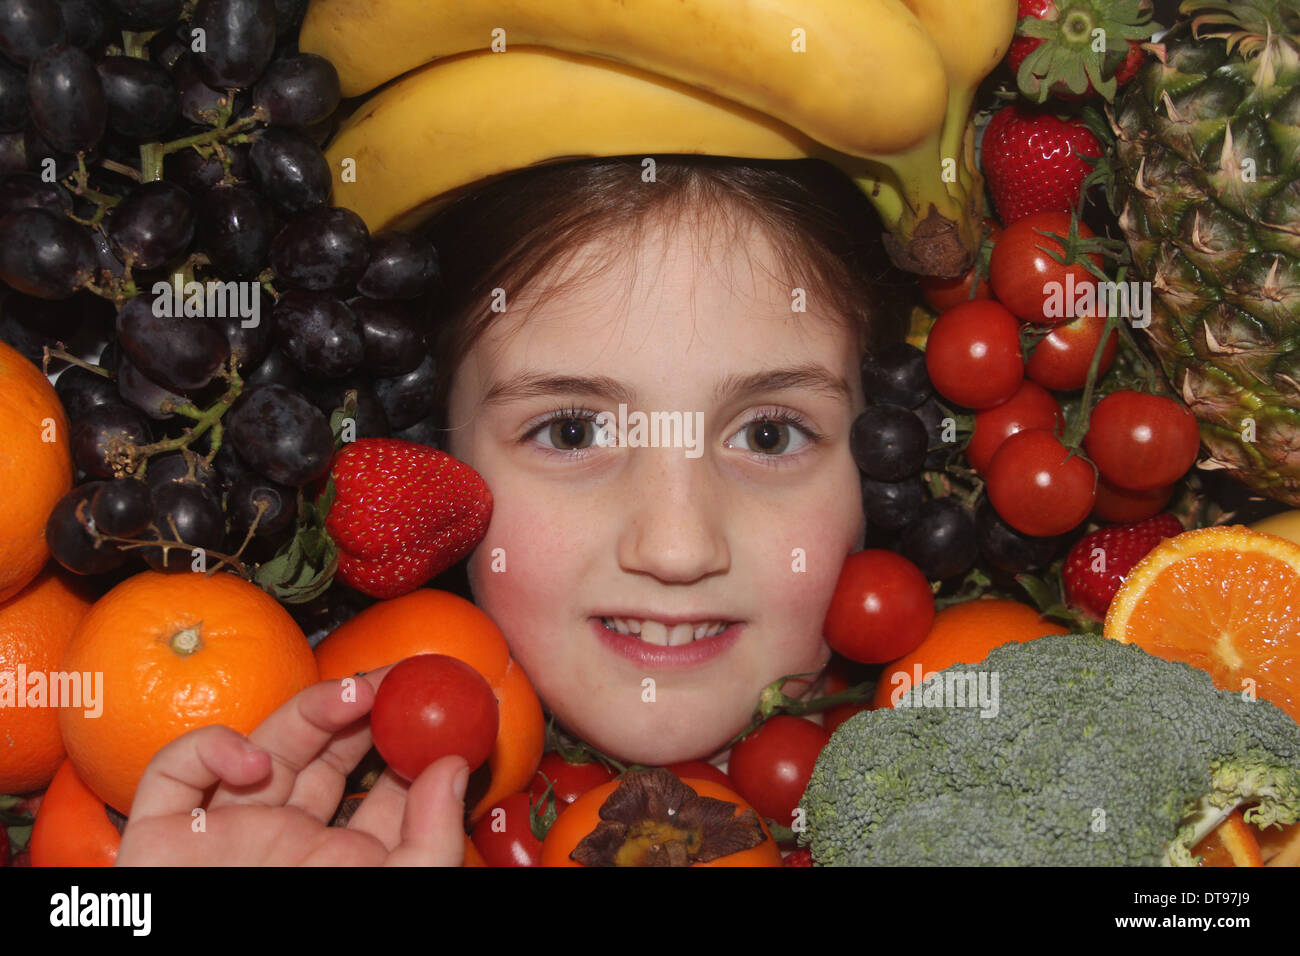 Young caucasian girl's face surrounded by fruit and vegetables holding a cherry tomato, five a day, England, UK Stock Photo